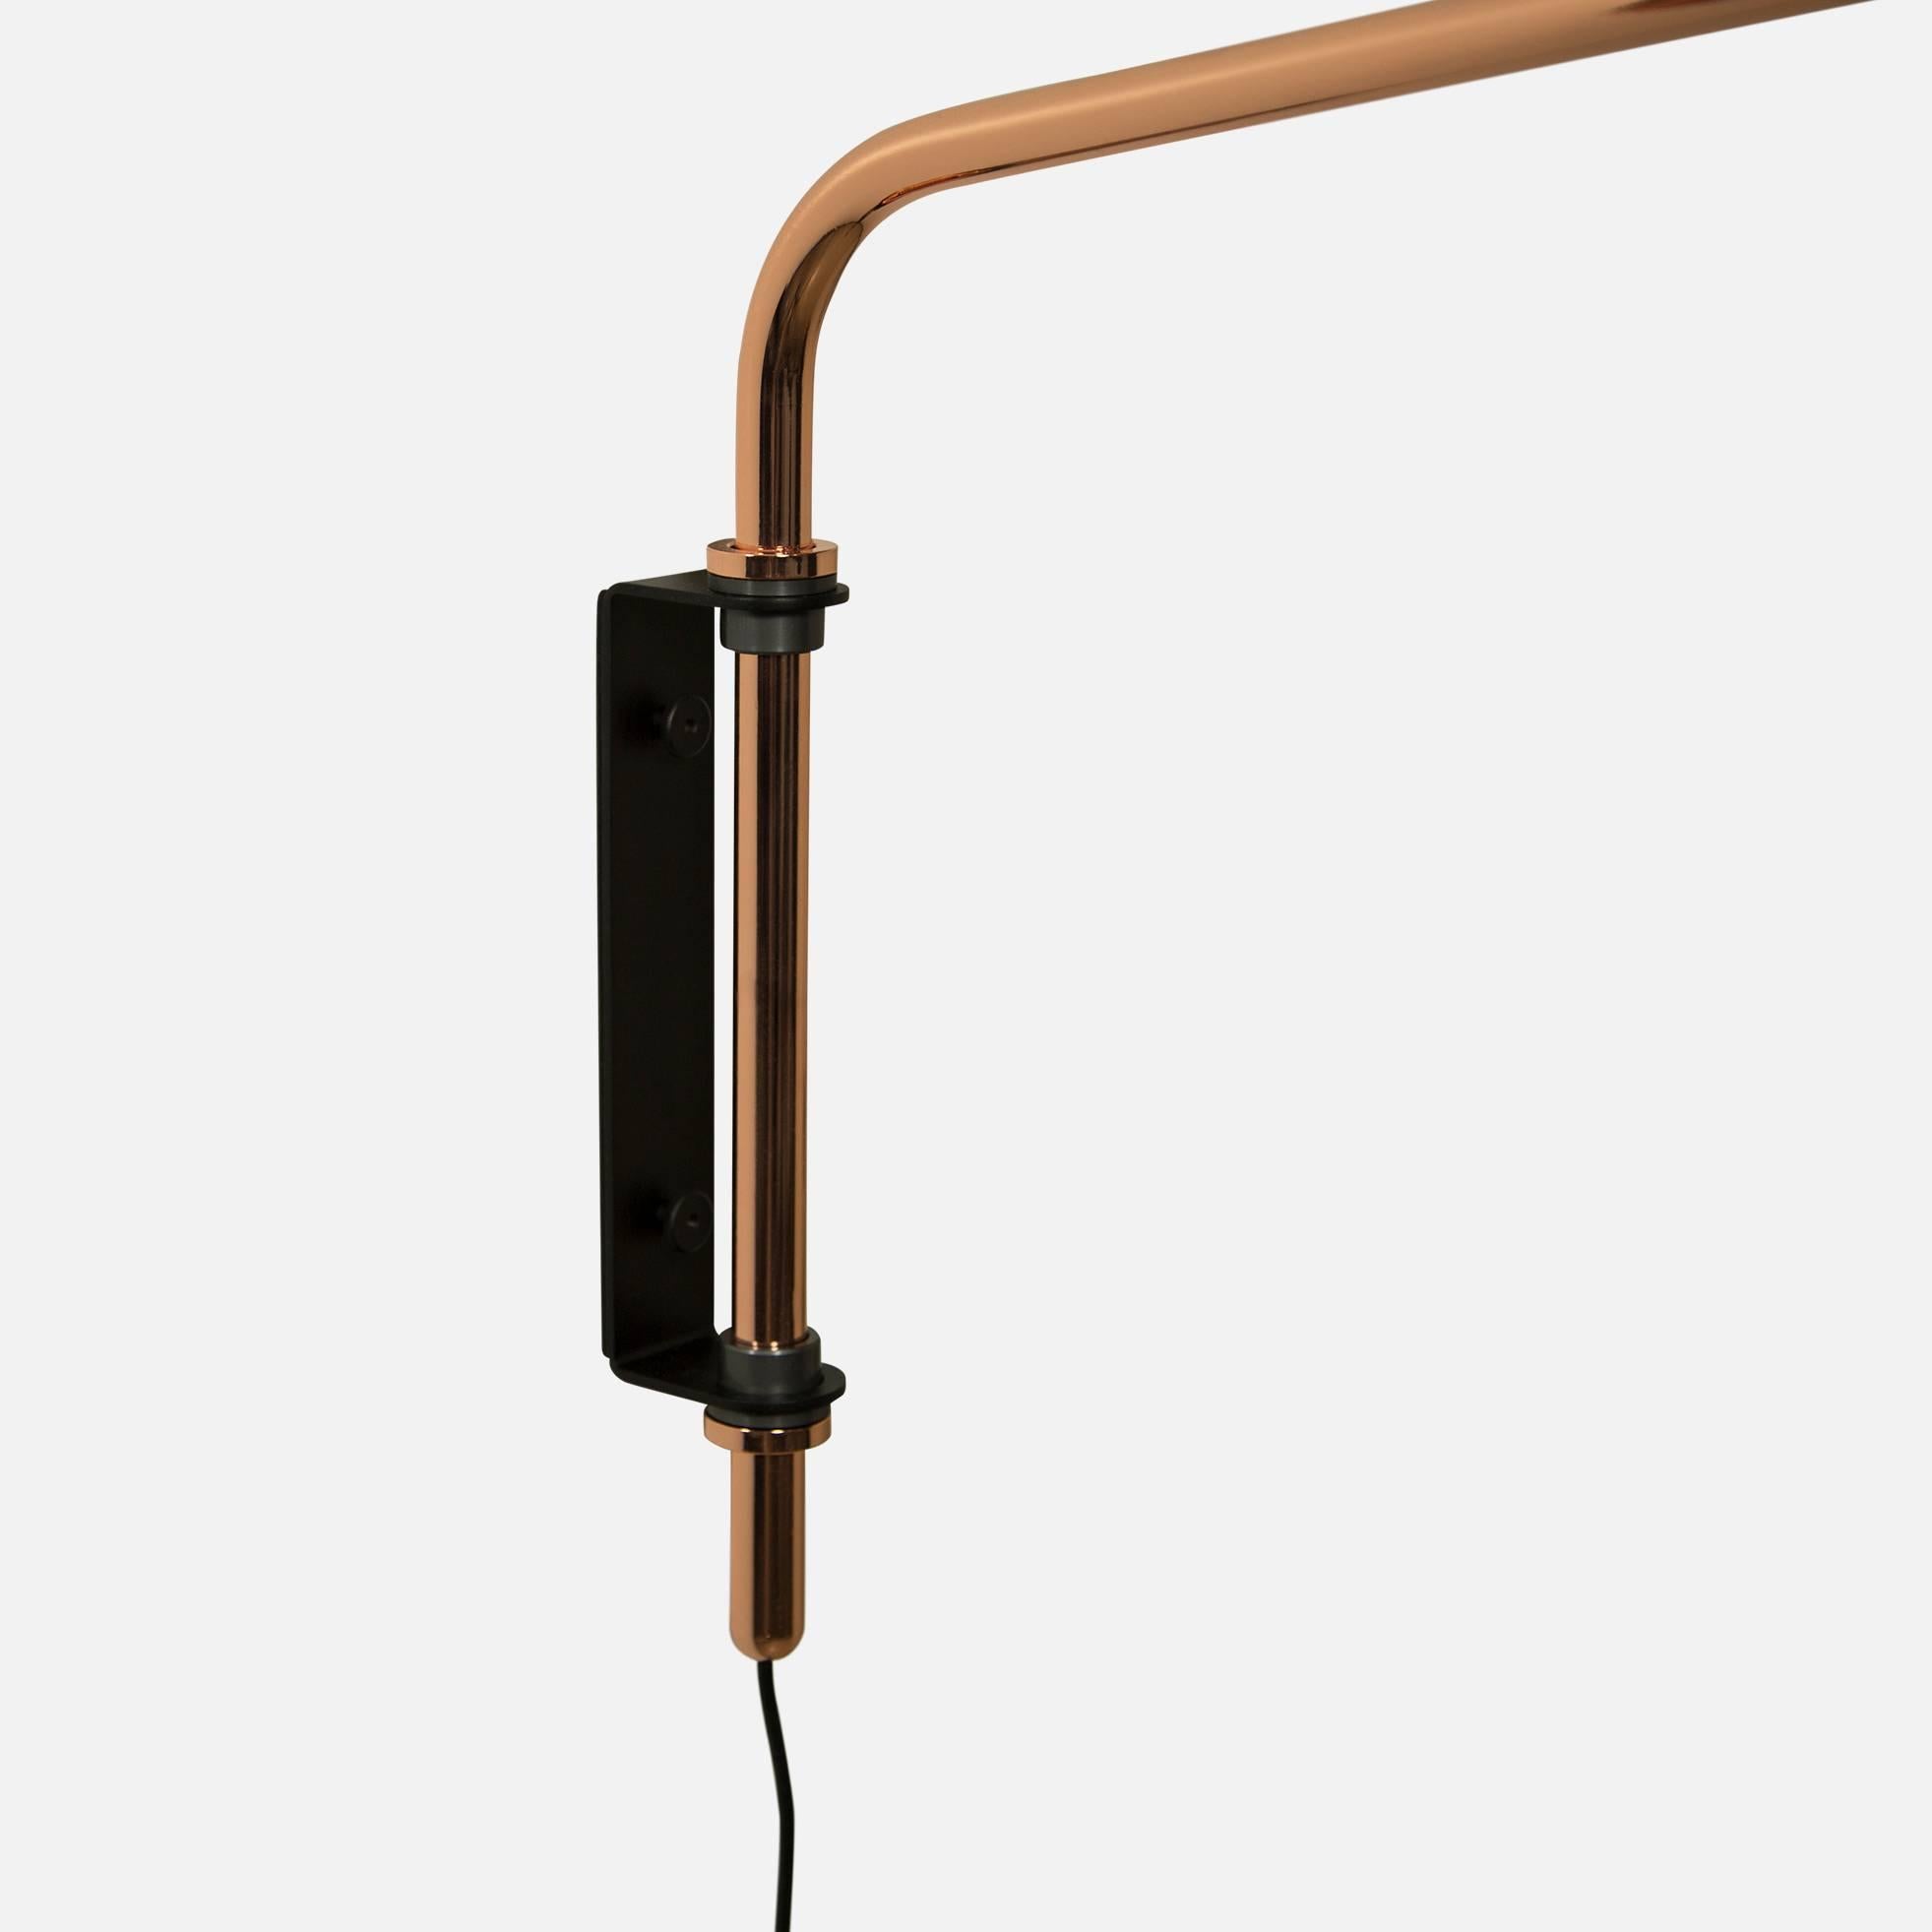 American Signal Swing Arm Sconce, Black X Brass, Short, from Souda, Made to Order For Sale